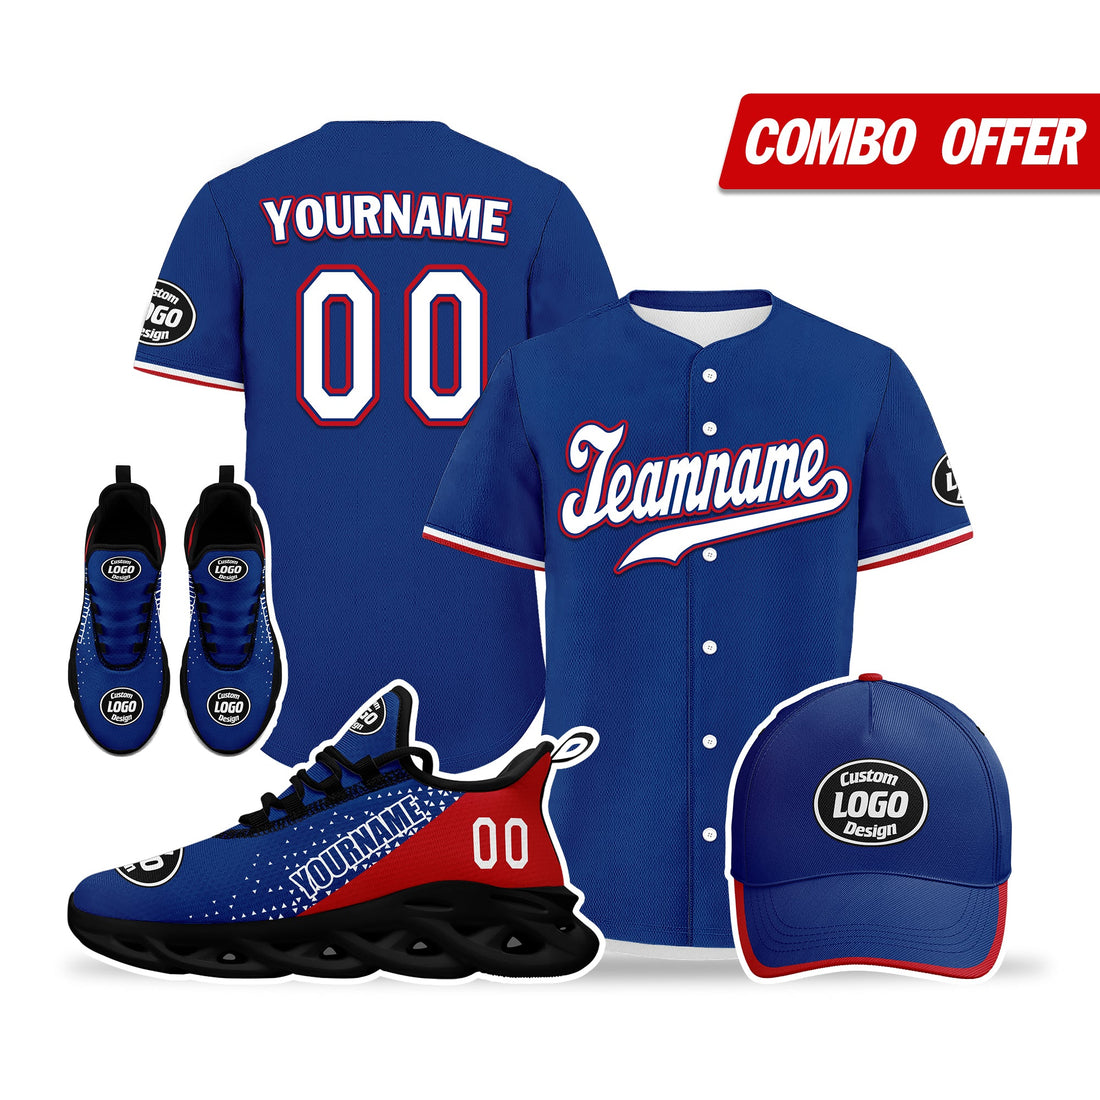 Custom Blue Red Jersey MaxSoul Shoes and Hat Combo Offer Personalized ZH-D0b009b-b